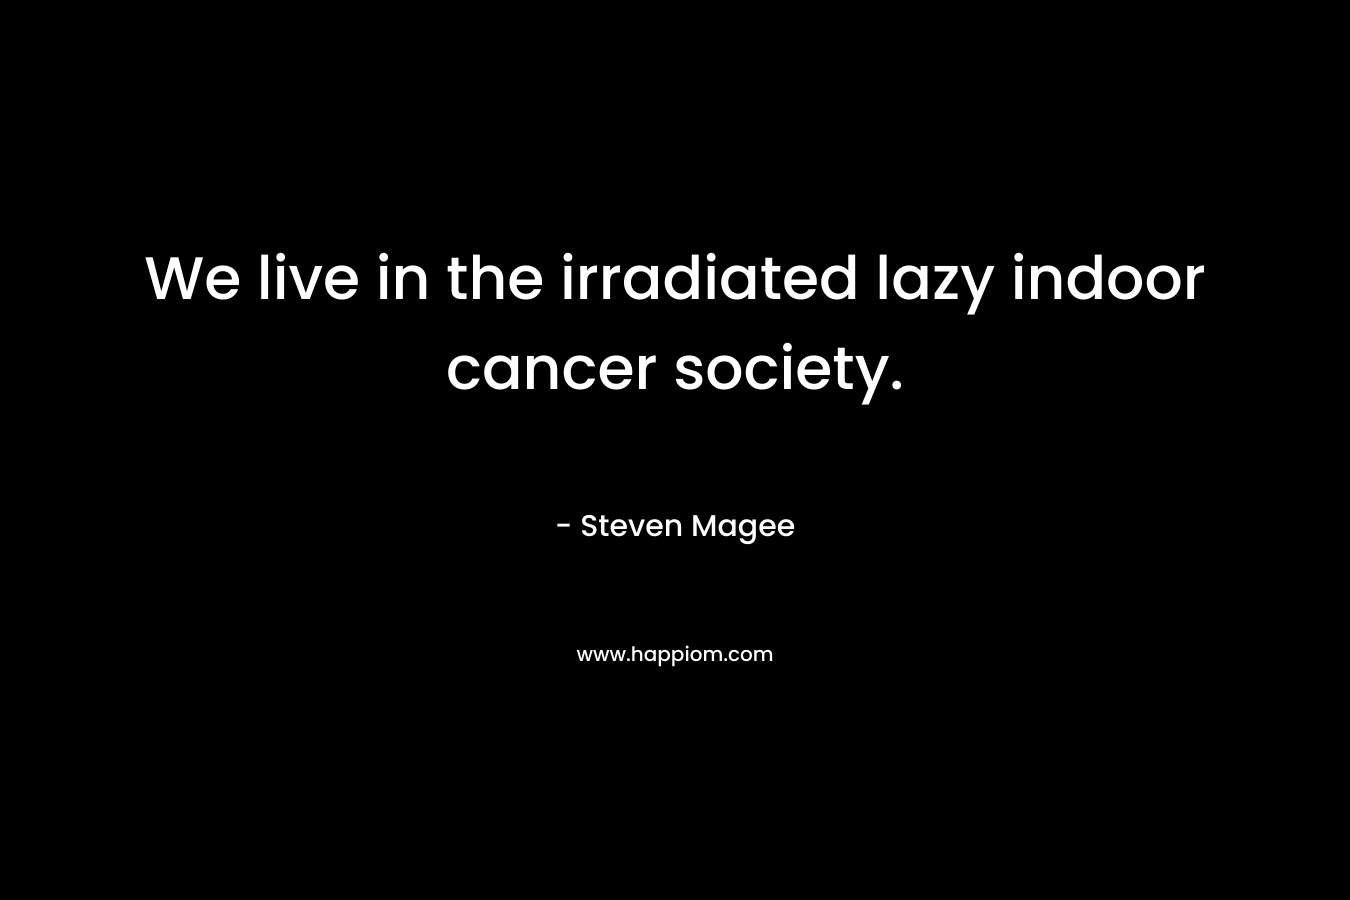 We live in the irradiated lazy indoor cancer society. – Steven Magee